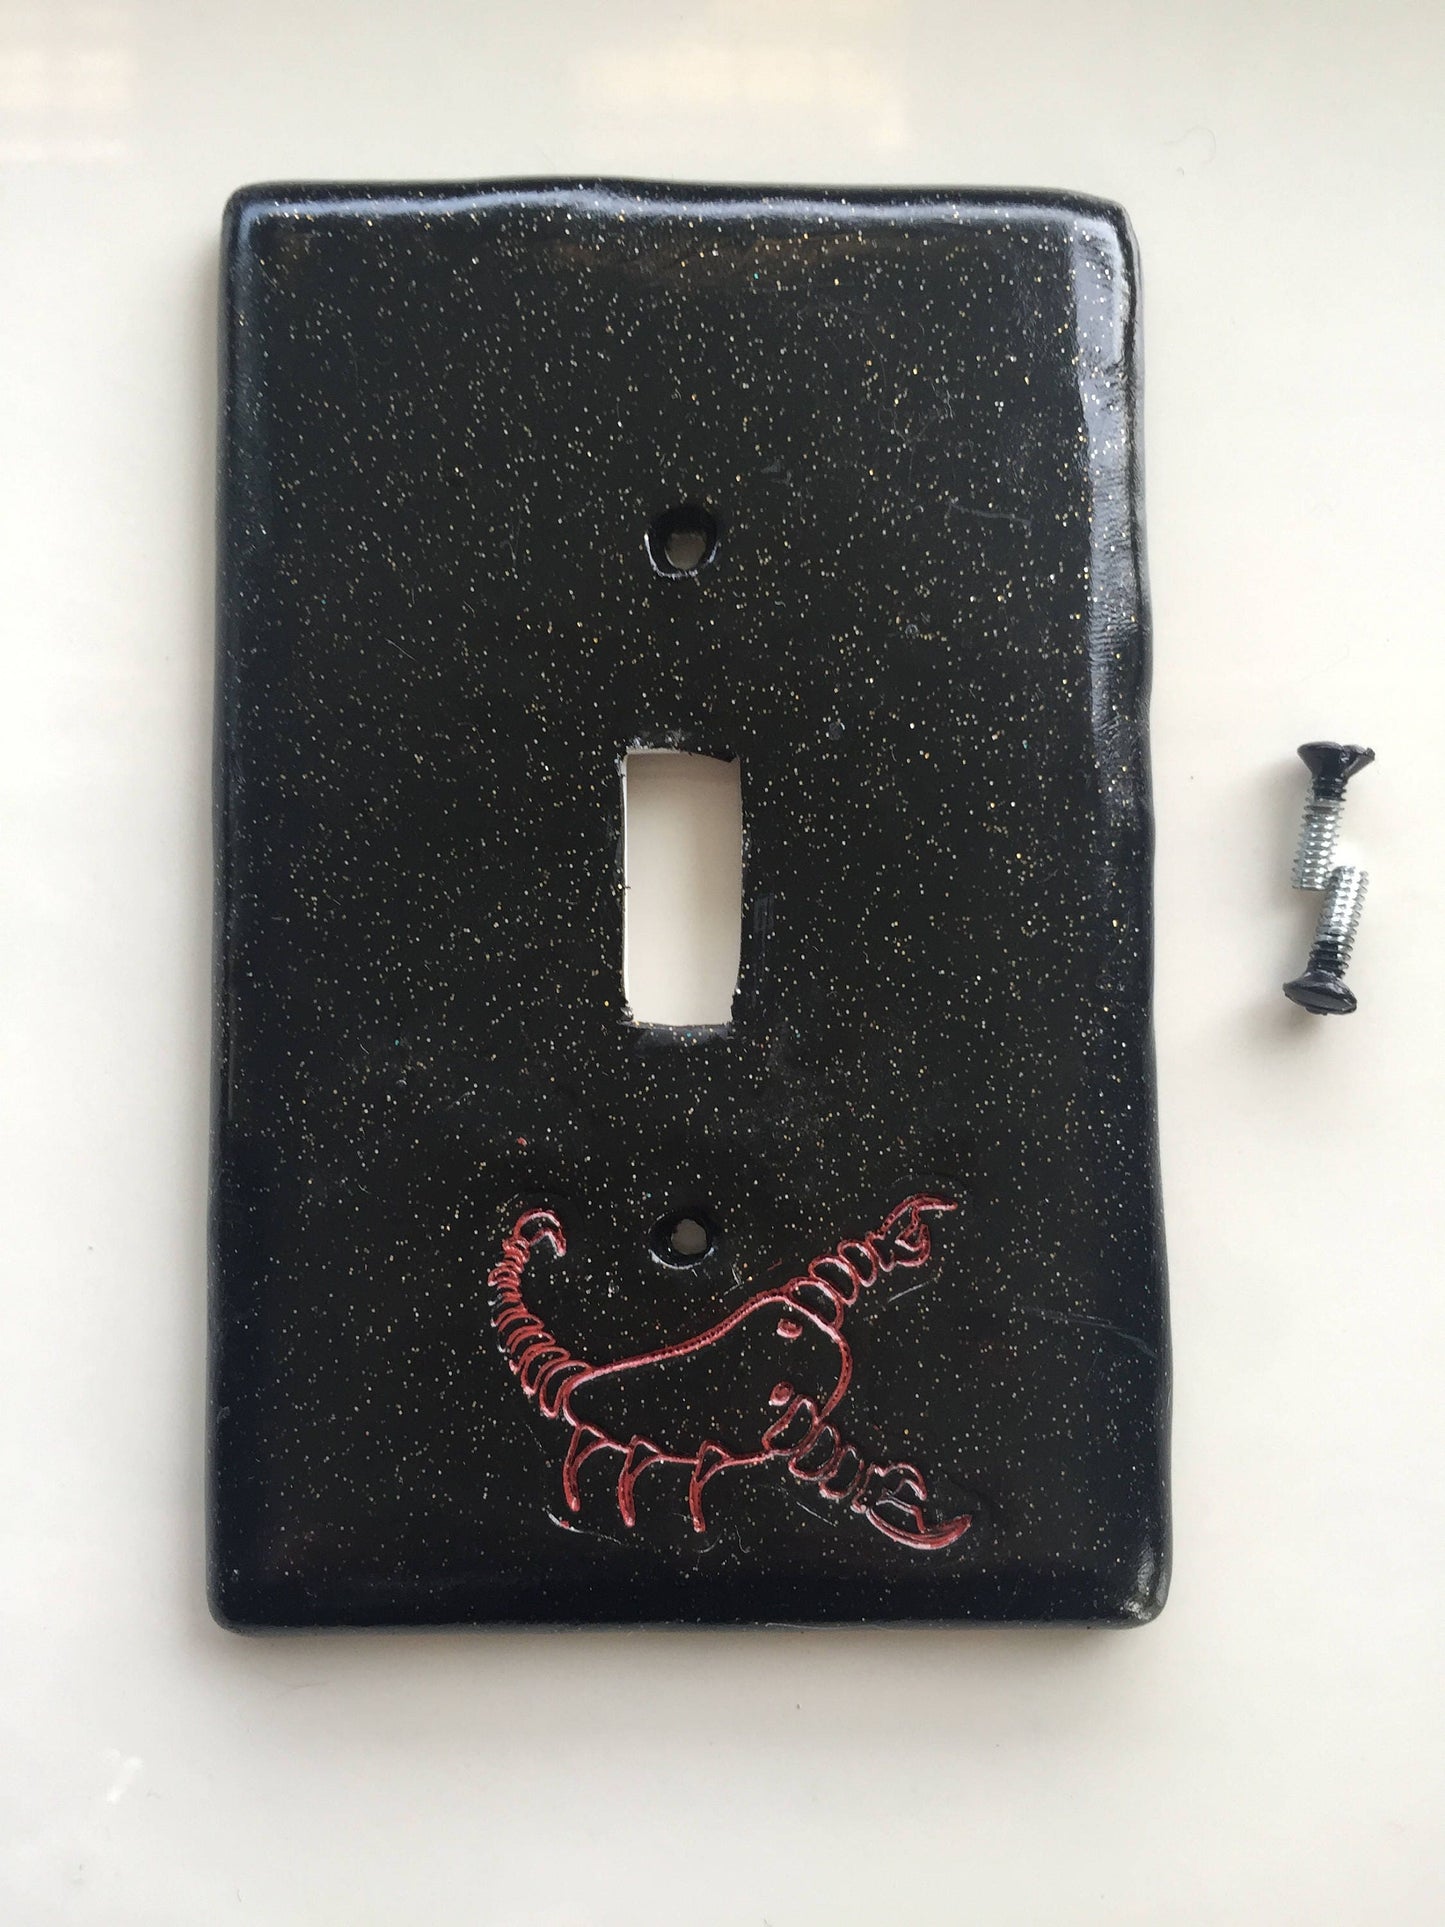 Scorpio The Scorpion light switch plate cover for single toggle switch plate cover, black with glitter and deep red custom colors available